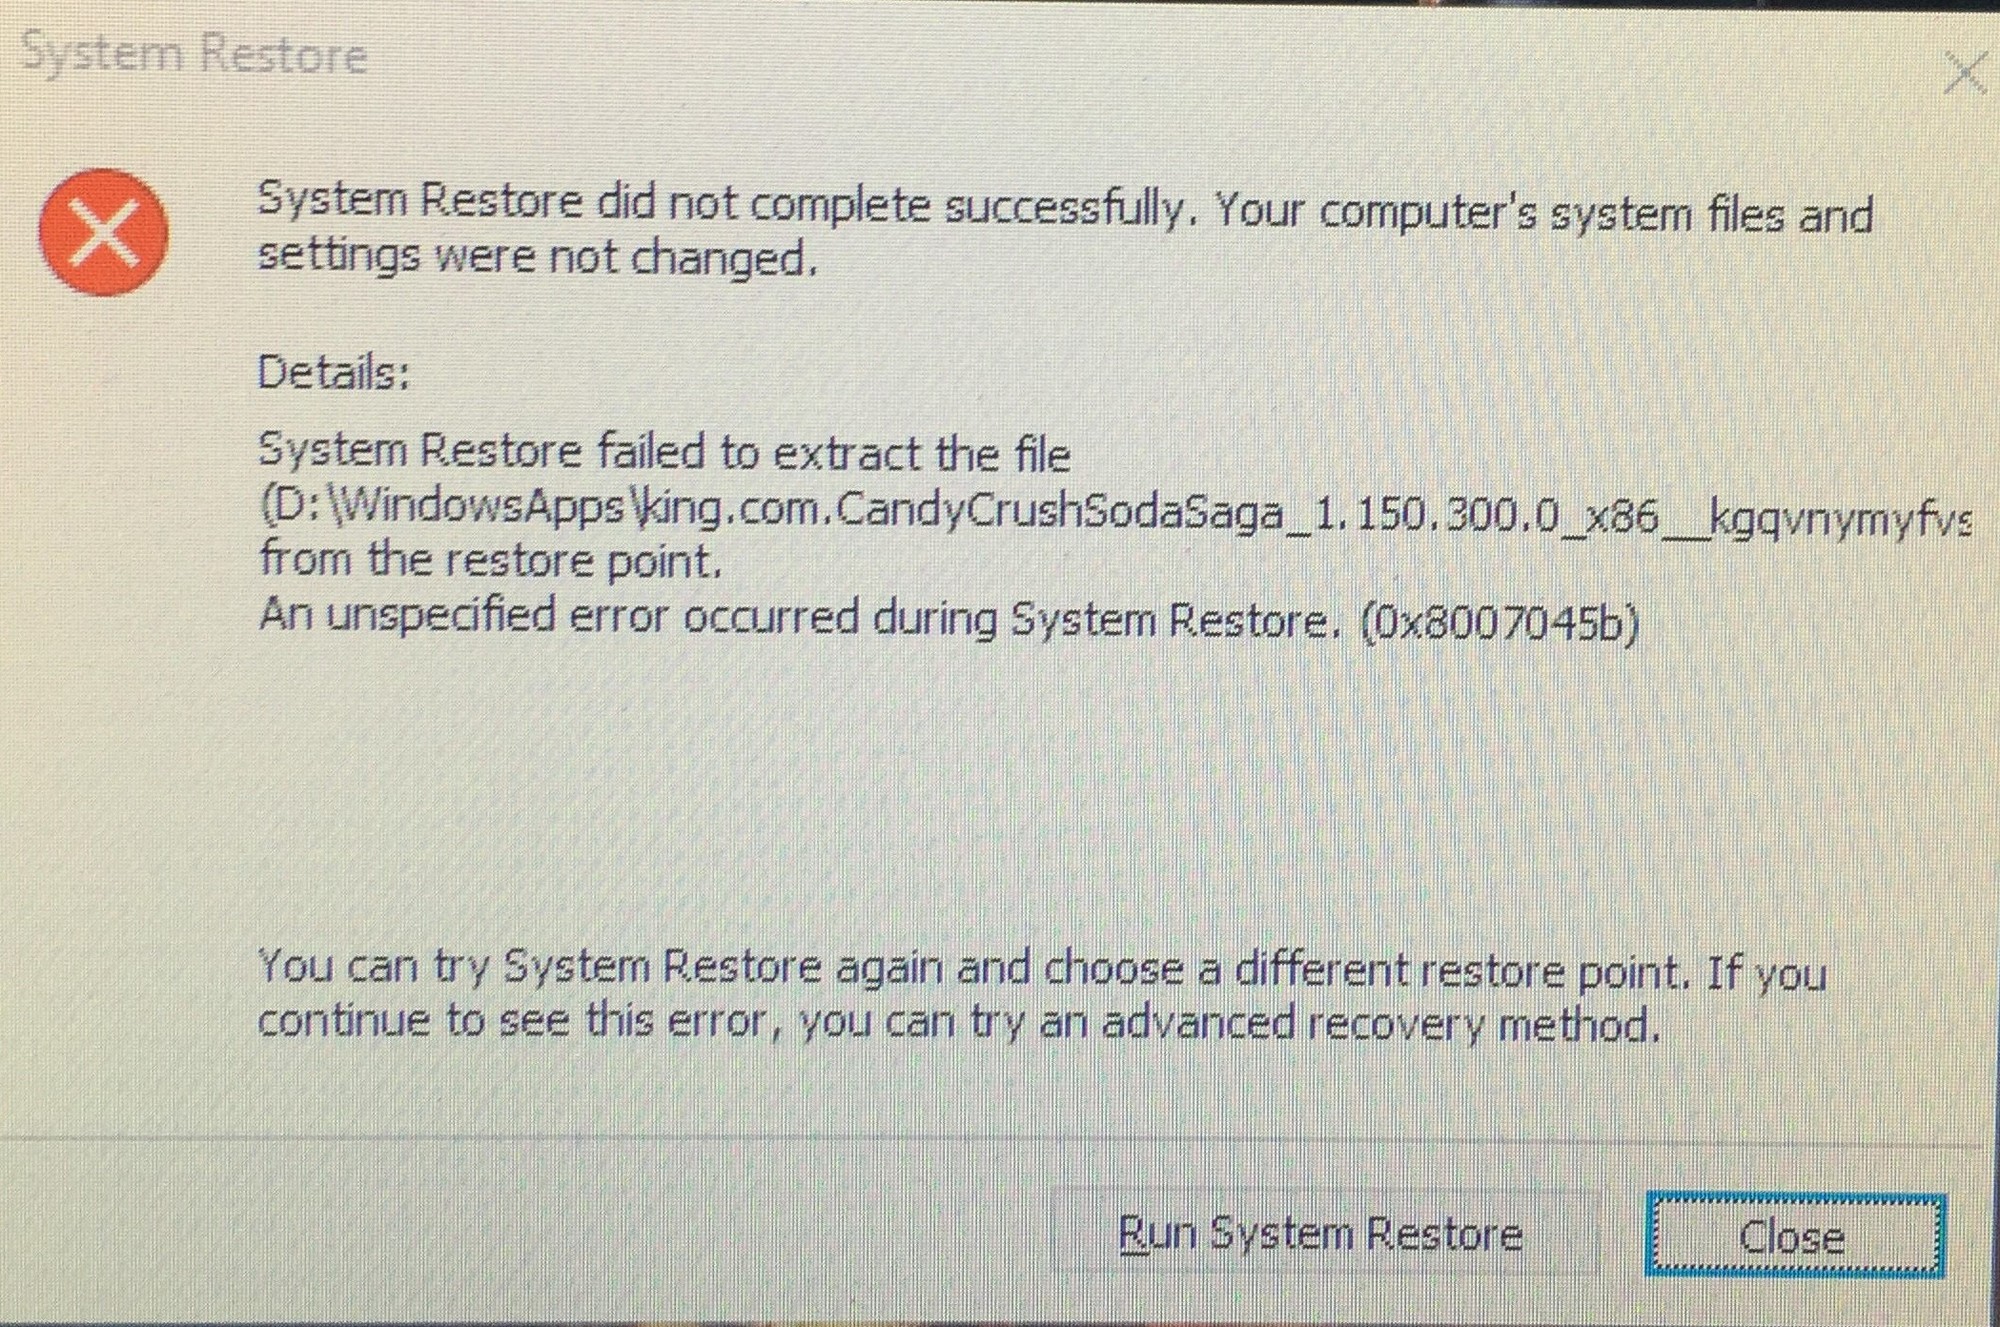 All system restore attempts fail with error codes 0x8007007e and 0x8007045b 8f23144c-06b8-4924-9f29-ec42948f92e1?upload=true.jpg